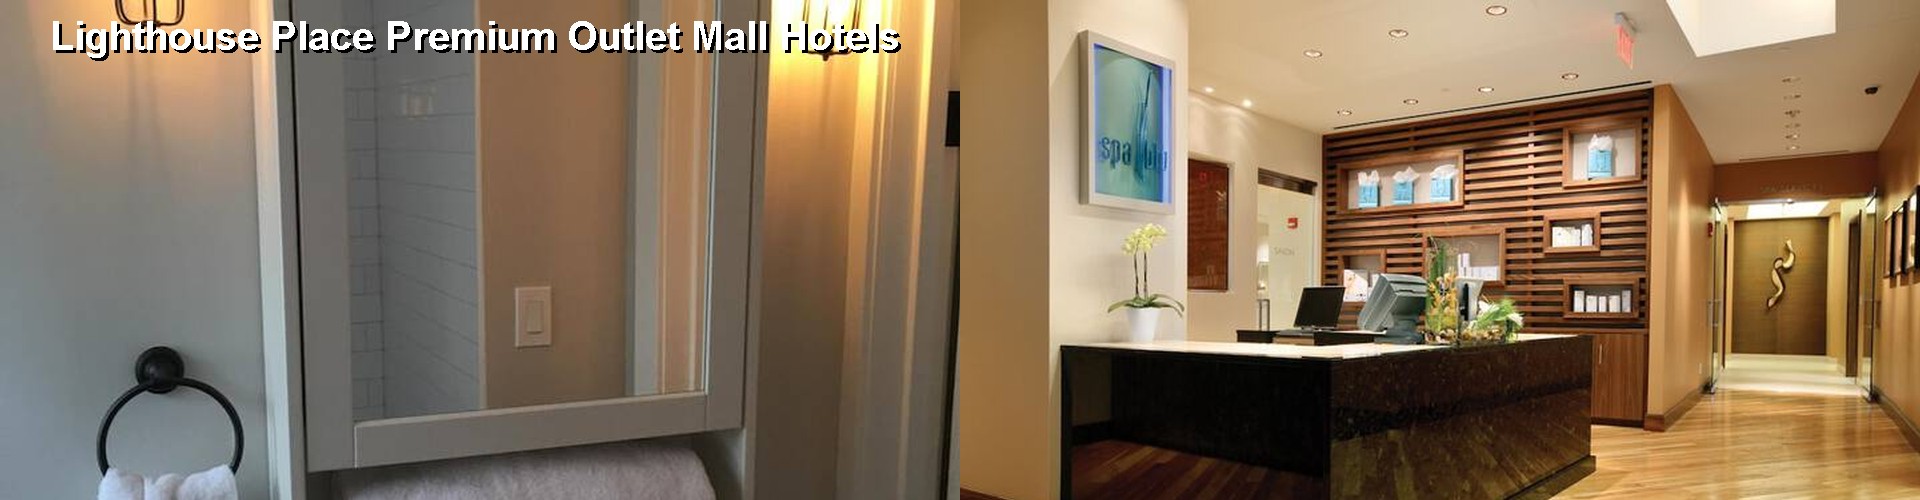 2 Best Hotels near Lighthouse Place Premium Outlet Mall